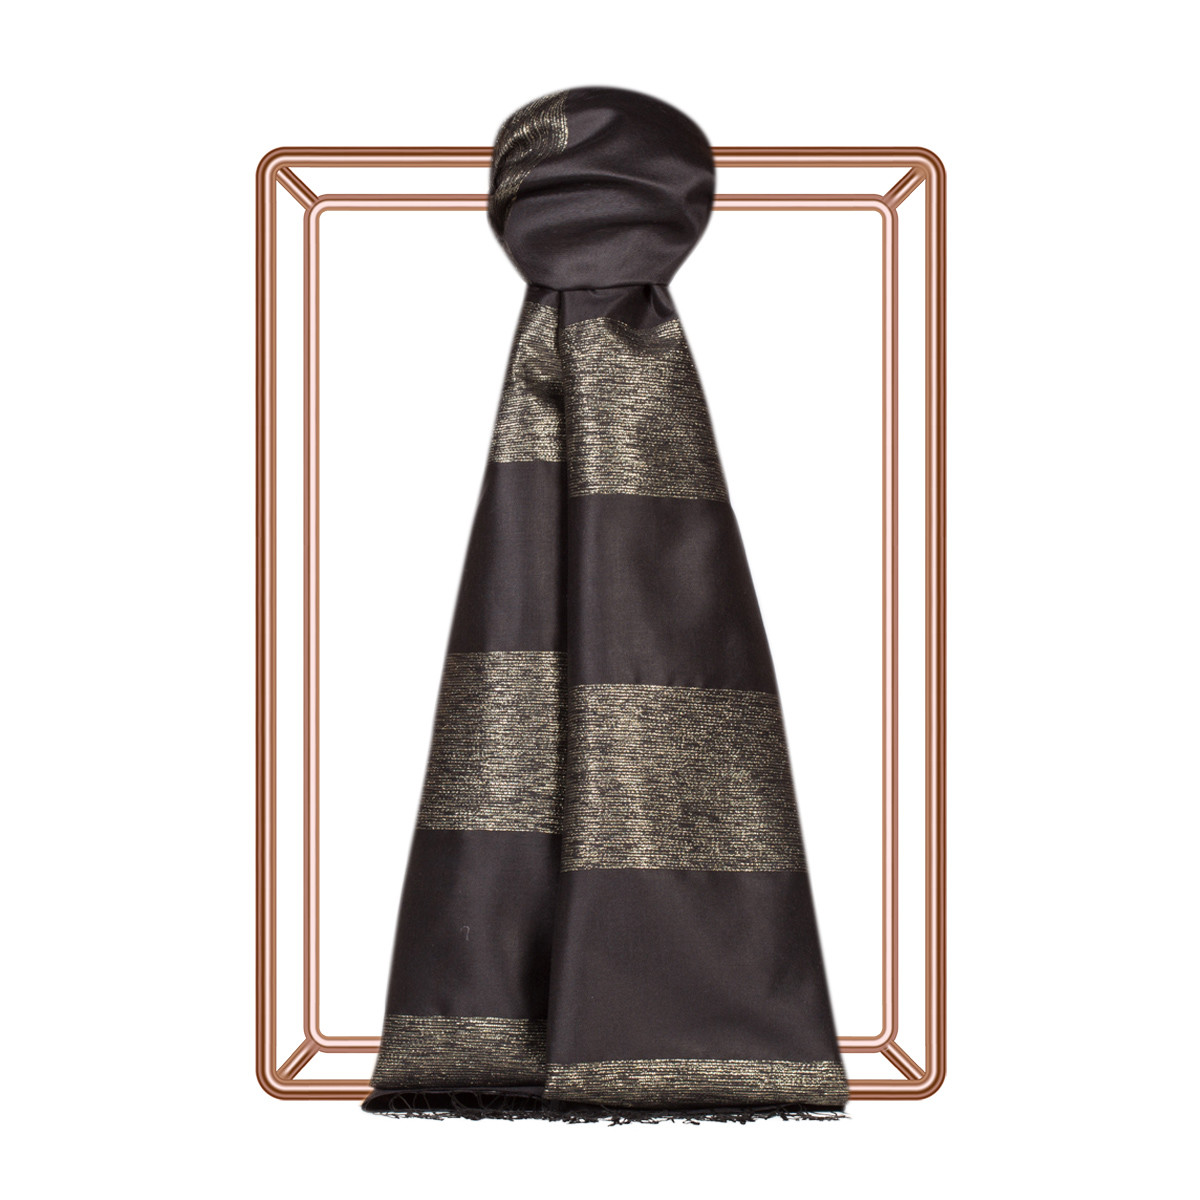 gold and black silk scarf